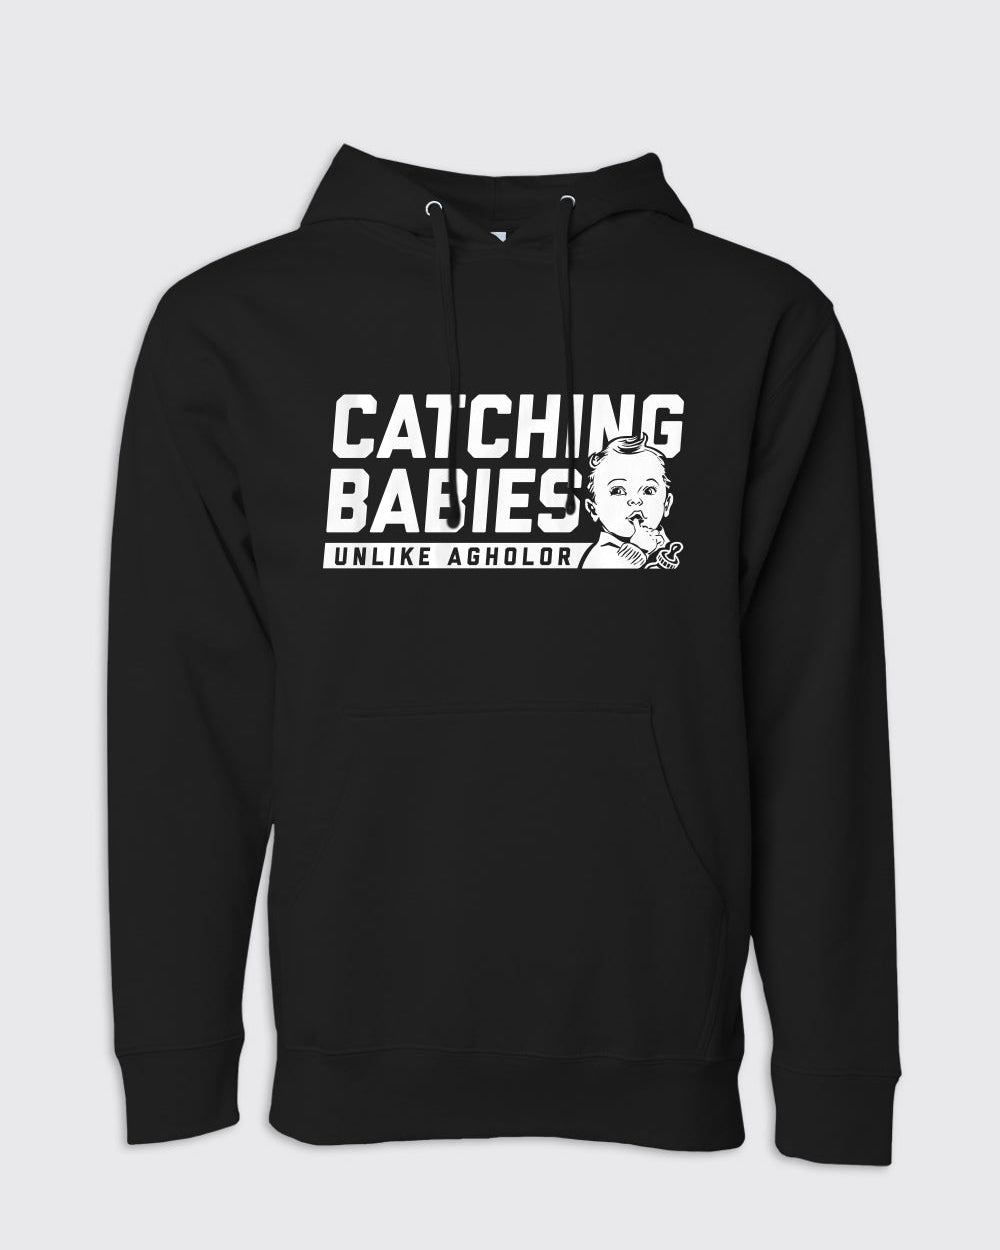 Catching Babies Unlike Agholor Hoodie - Eagles, Hoodies - Philly Sports Shirts